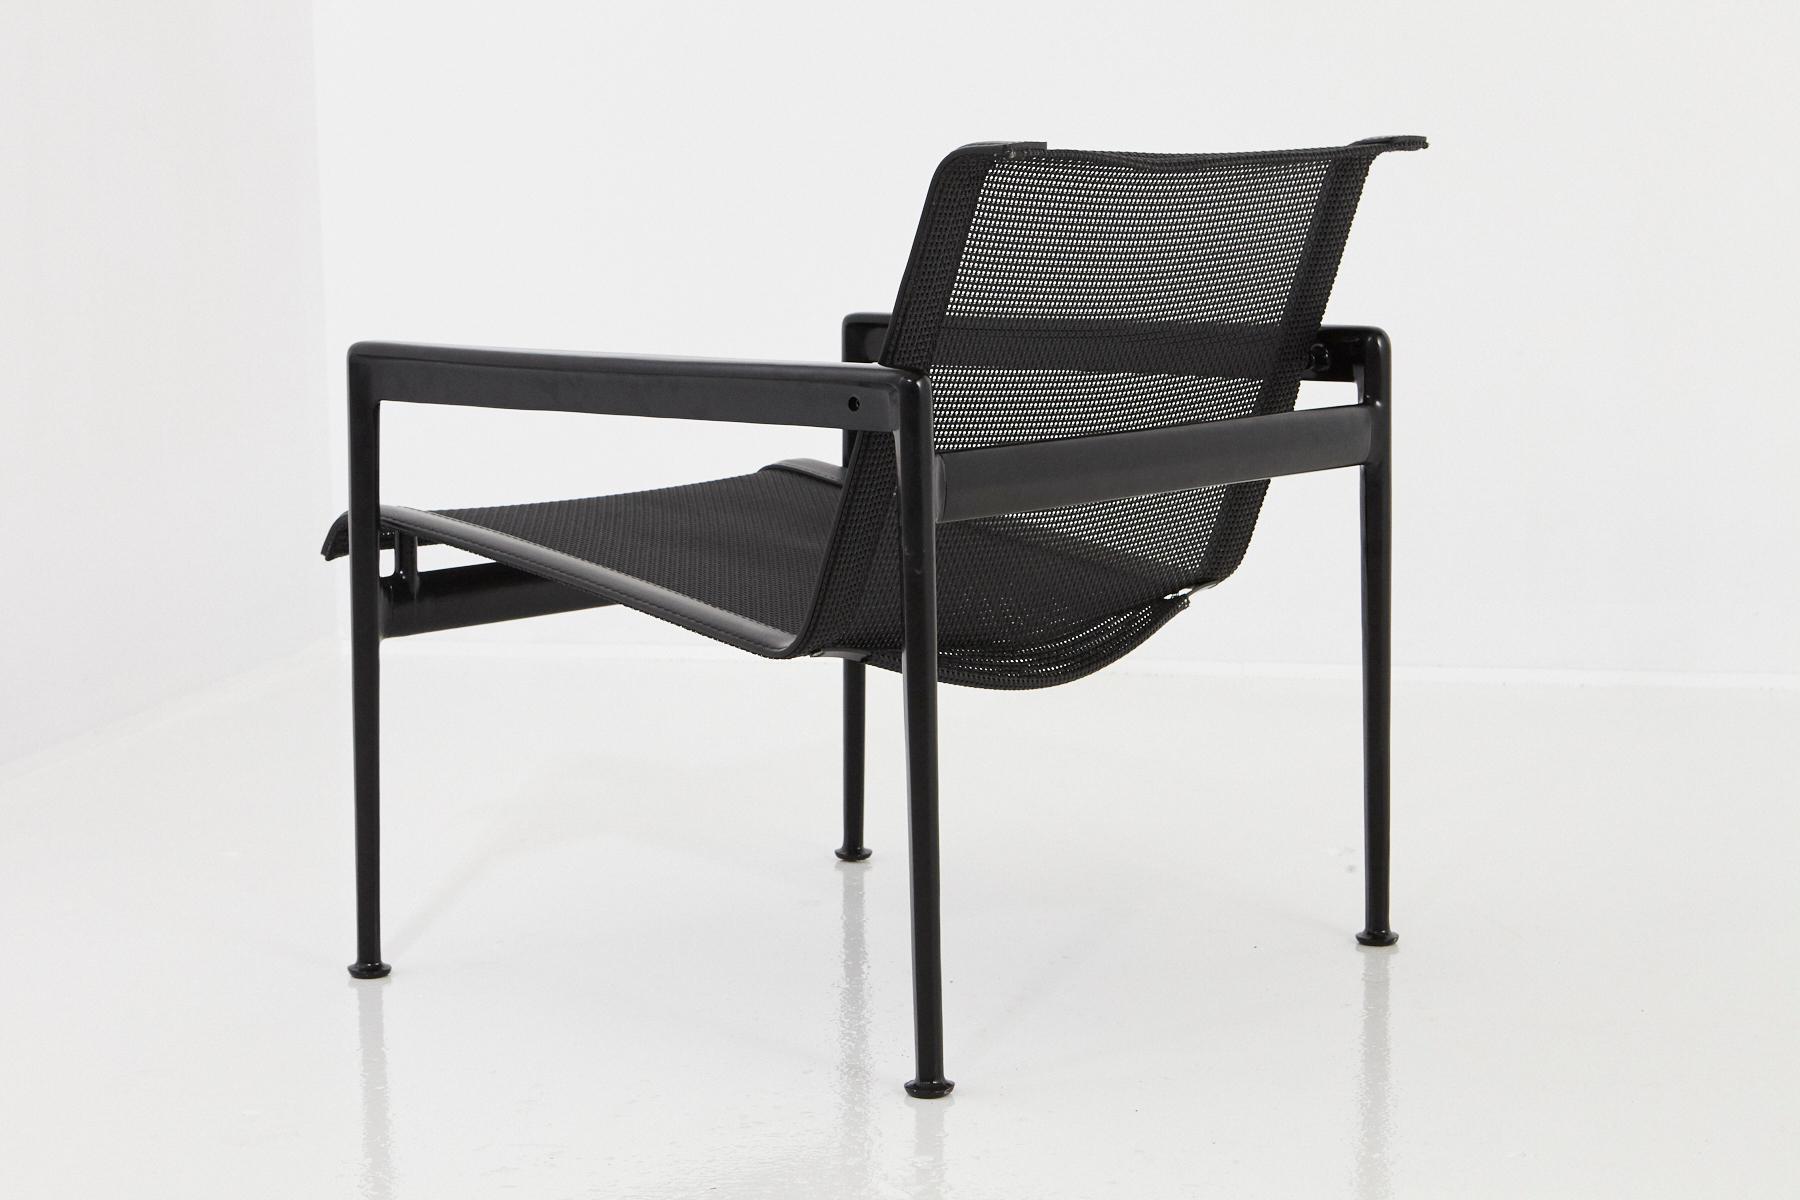 Powder-Coated Richard Schultz All Black Garden Lounge Chair from the '1966 Collection' For Sale